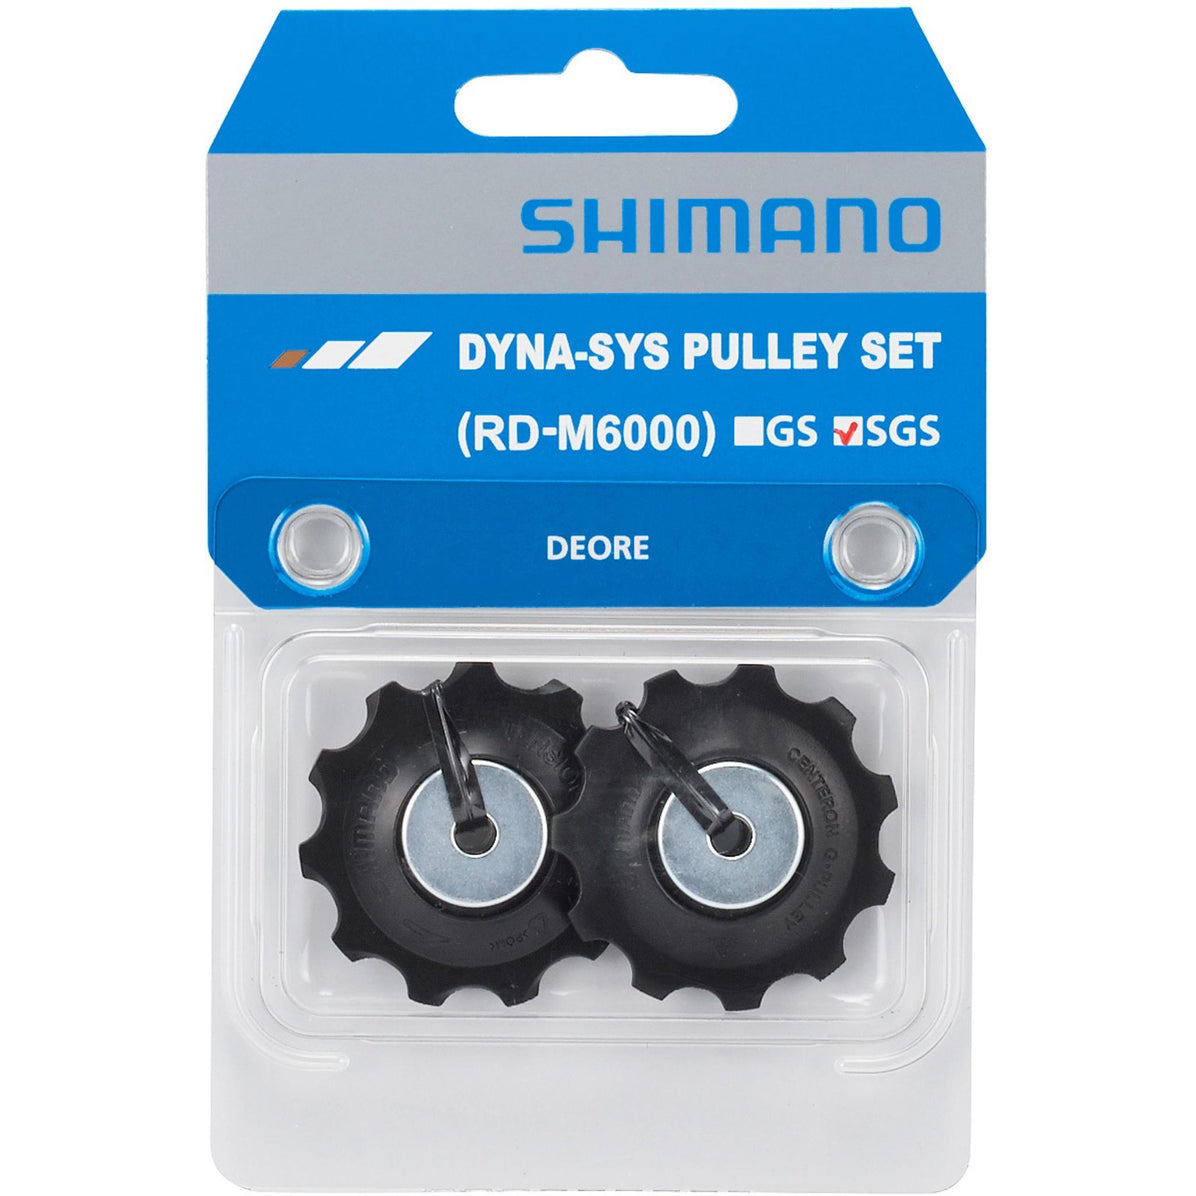 Shimano Deore RD-M6000 tension and guide pulley set, SGS